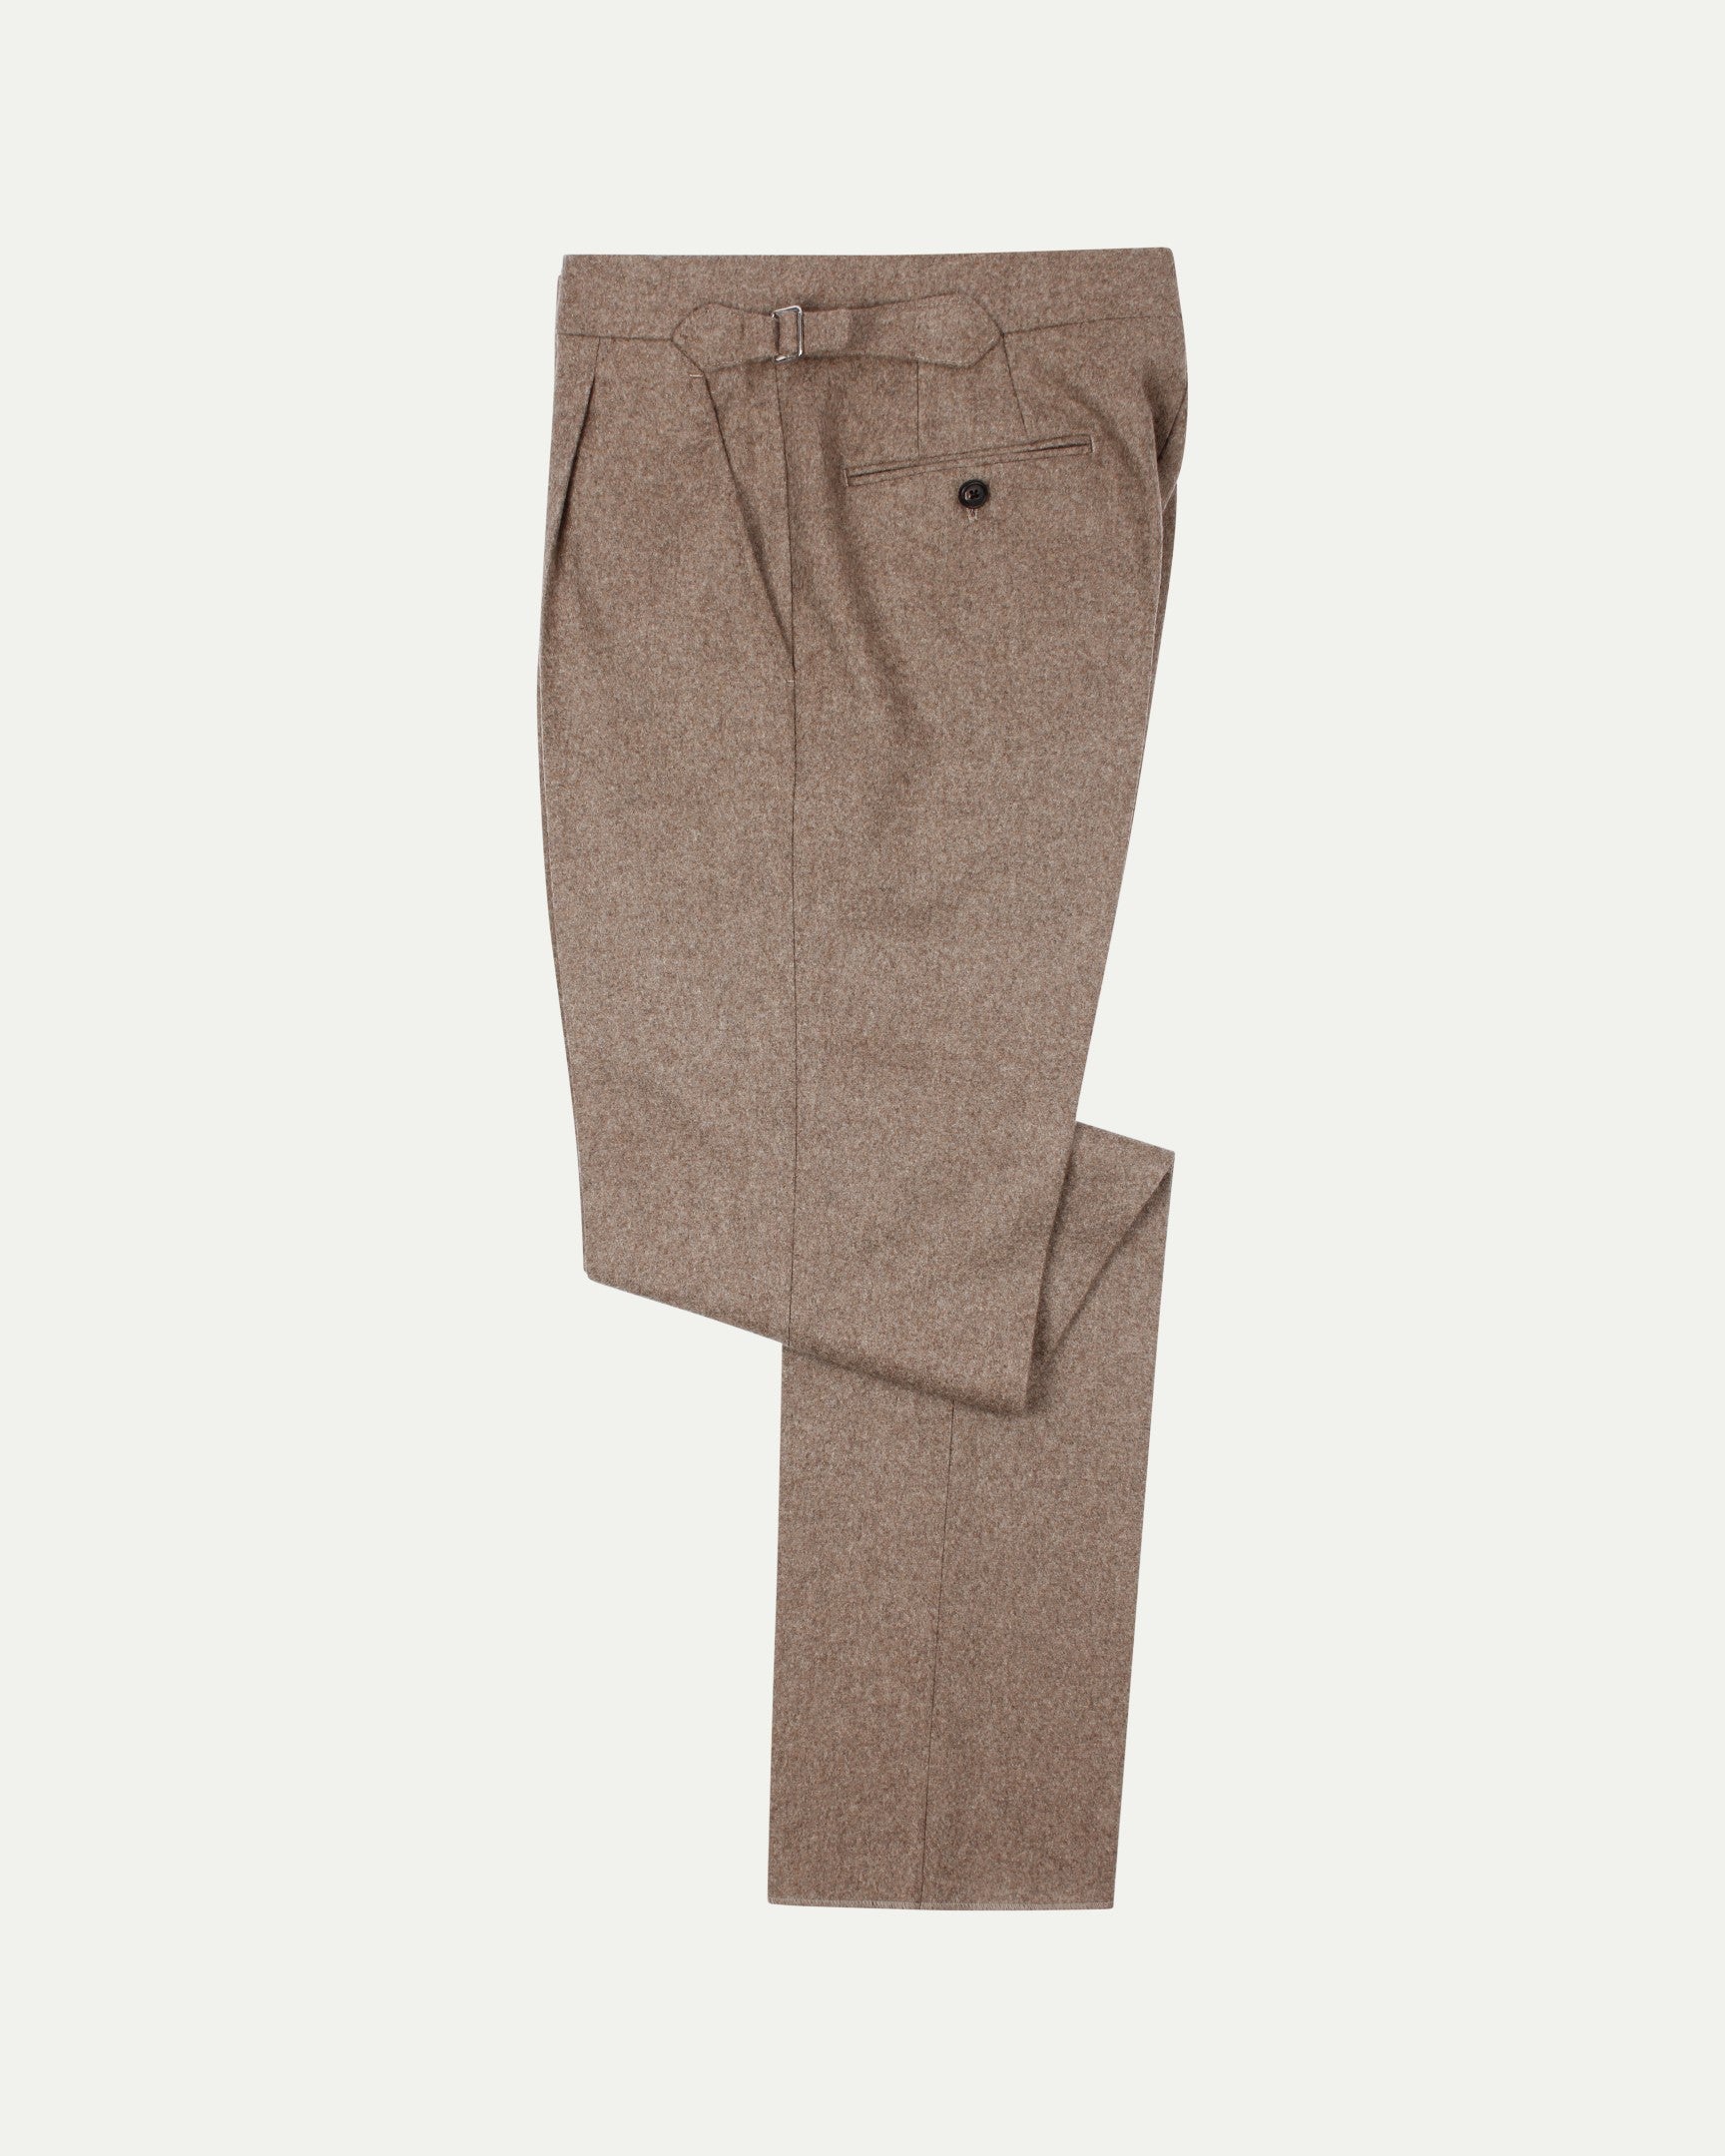 Made-To-Order Trousers in Fawn Flannel